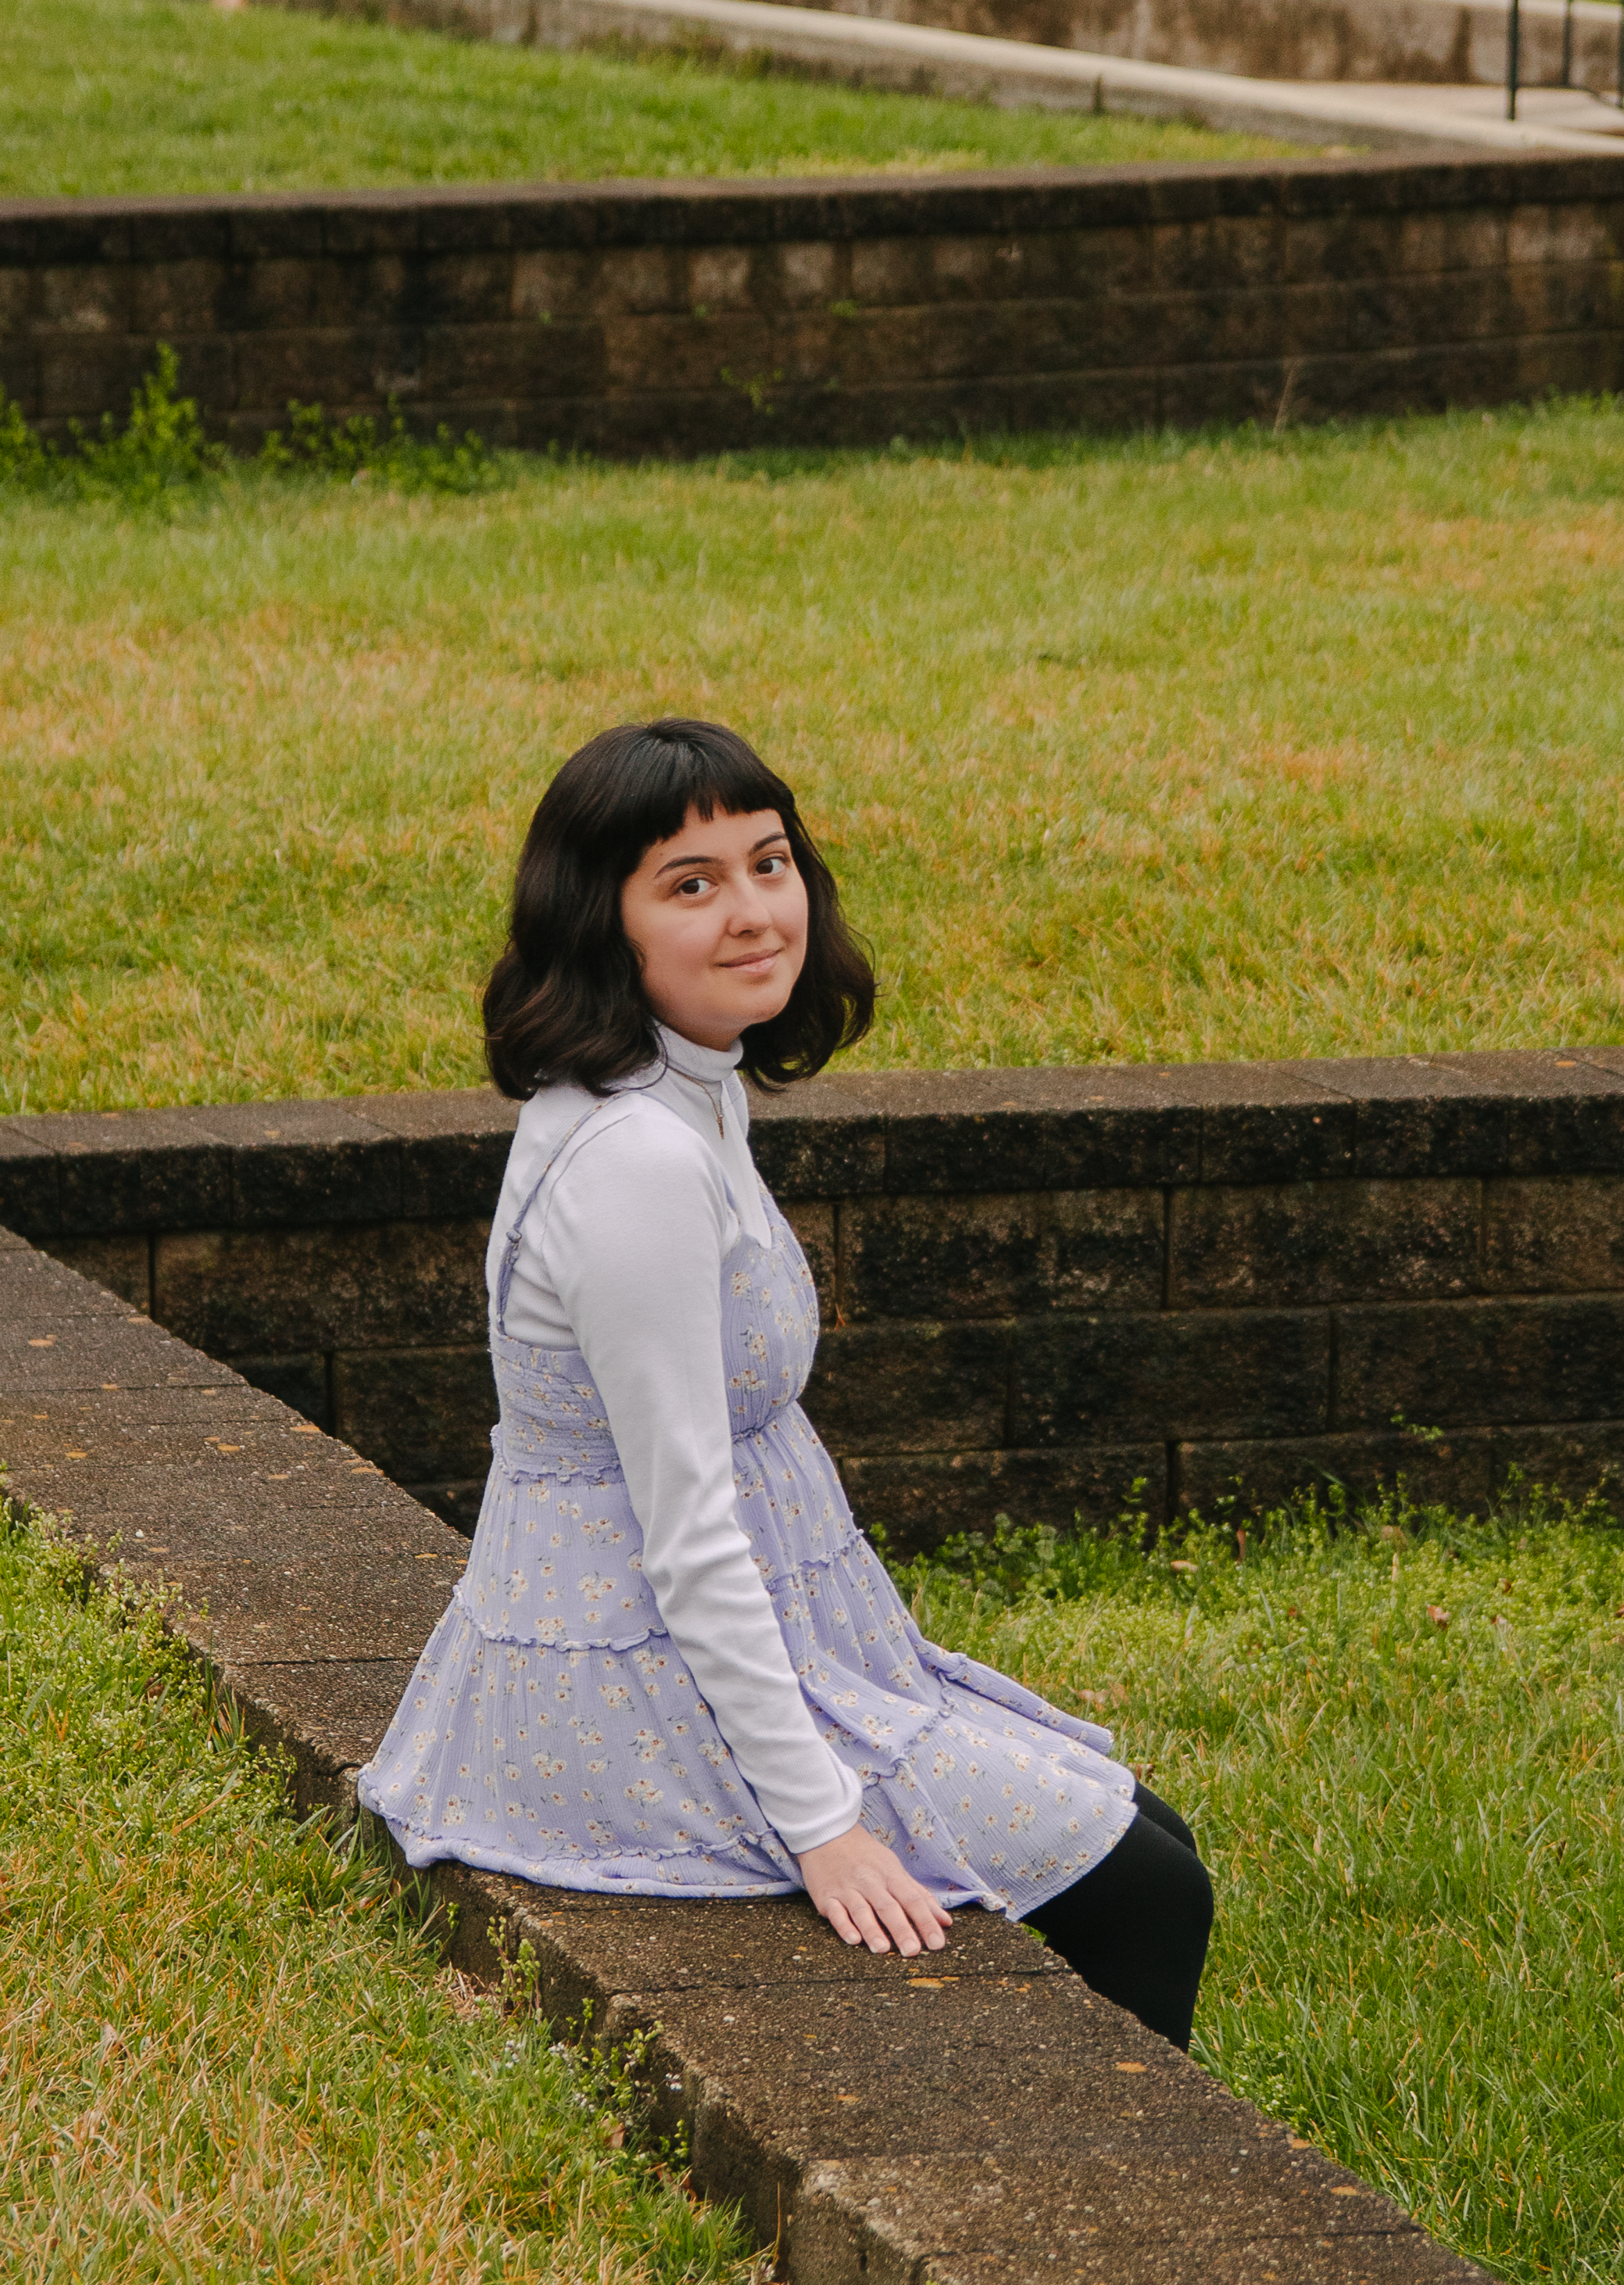 Photo of Grace sitting on a ledge in a grass field. She is smiling softly, has short black hair in a bob and is wearing a blue dress.